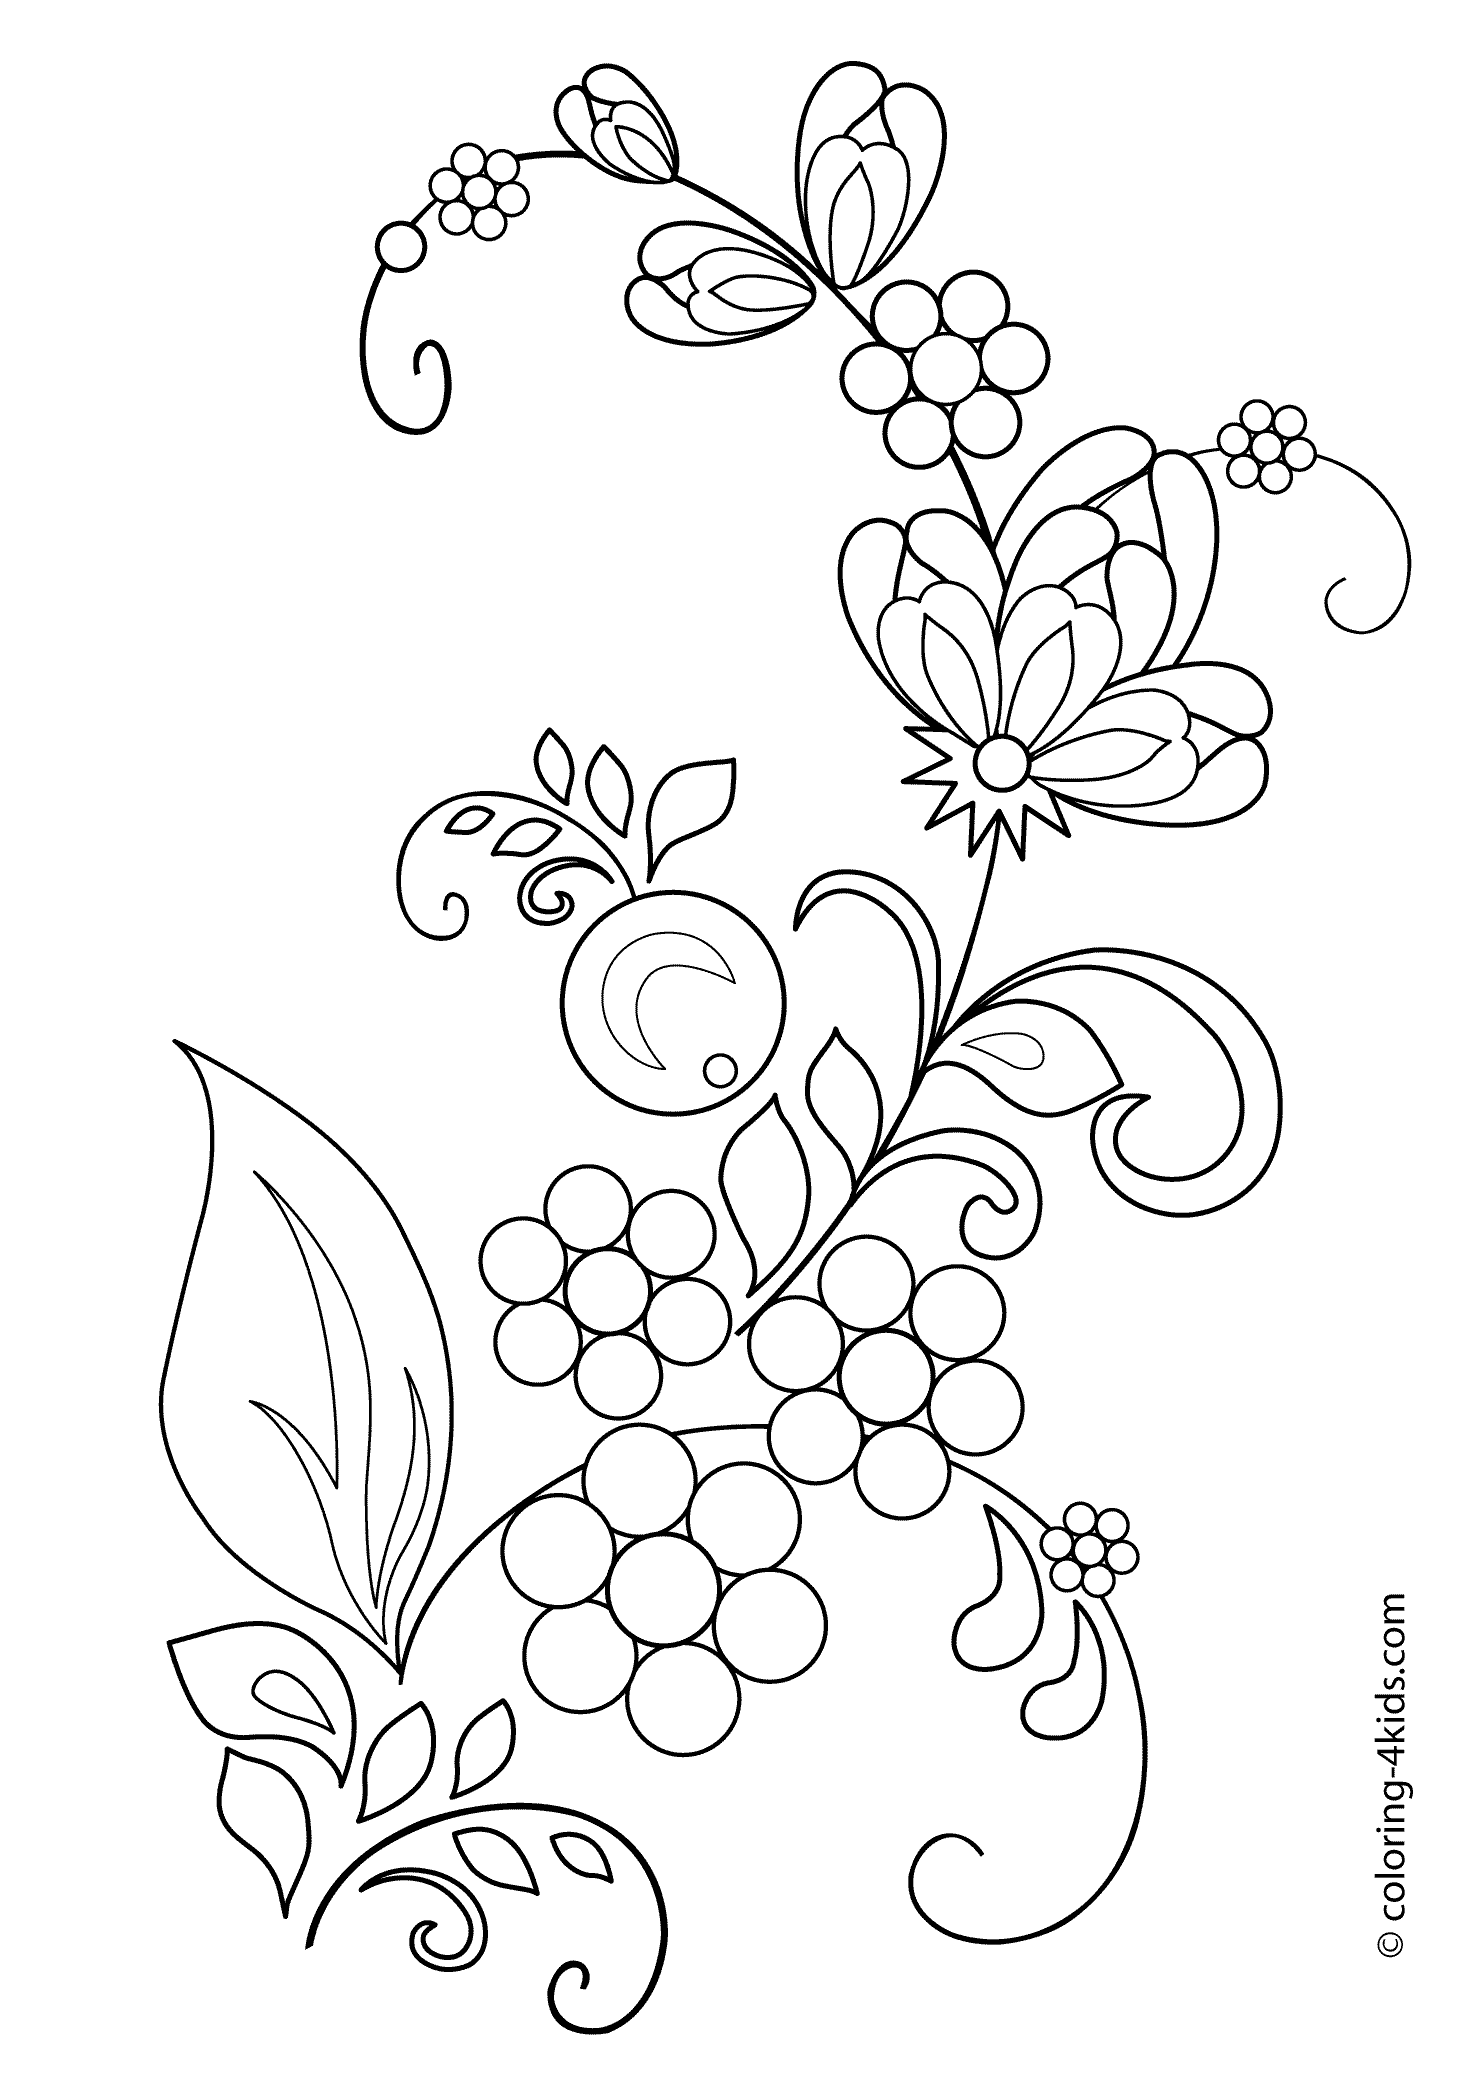 Free Flowers Drawing For Kids Download Free Clip Art Free Clip Art On Clipart Library,Diy Gifts For Friends During Quarantine